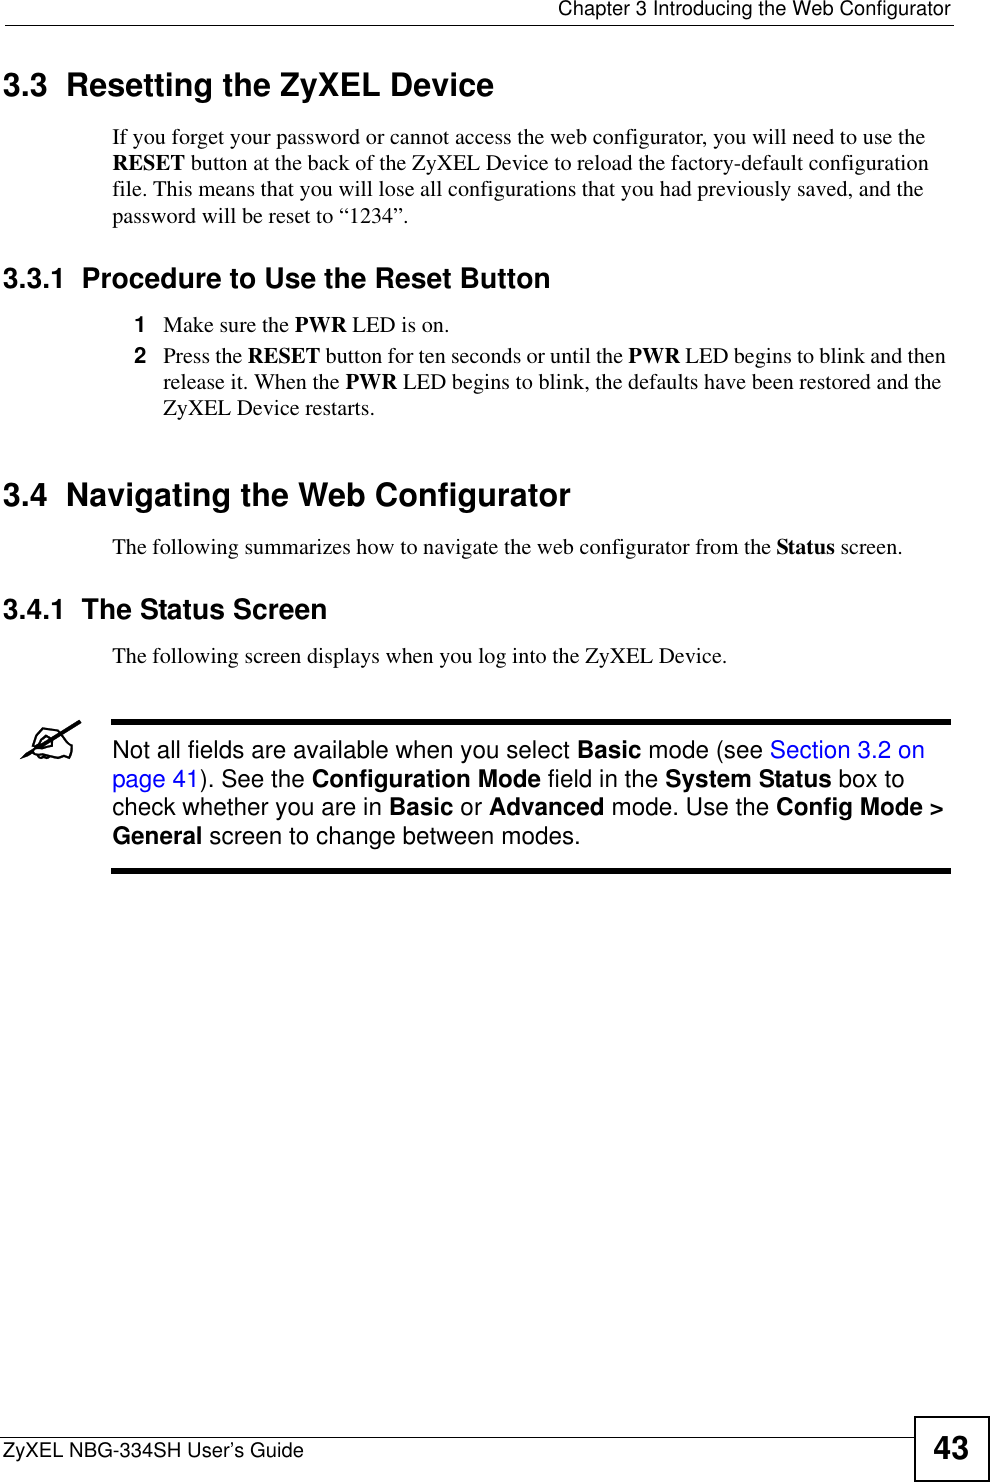  Chapter 3 Introducing the Web ConfiguratorZyXEL NBG-334SH User’s Guide 433.3  Resetting the ZyXEL DeviceIf you forget your password or cannot access the web configurator, you will need to use the RESET button at the back of the ZyXEL Device to reload the factory-default configuration file. This means that you will lose all configurations that you had previously saved, and the password will be reset to “1234”.3.3.1  Procedure to Use the Reset Button1Make sure the PWR LED is on.2Press the RESET button for ten seconds or until the PWR LED begins to blink and then release it. When the PWR LED begins to blink, the defaults have been restored and the ZyXEL Device restarts.3.4  Navigating the Web Configurator    The following summarizes how to navigate the web configurator from the Status screen.  3.4.1  The Status Screen The following screen displays when you log into the ZyXEL Device.&quot;Not all fields are available when you select Basic mode (see Section 3.2 on page 41). See the Configuration Mode field in the System Status box to check whether you are in Basic or Advanced mode. Use the Config Mode &gt; General screen to change between modes.